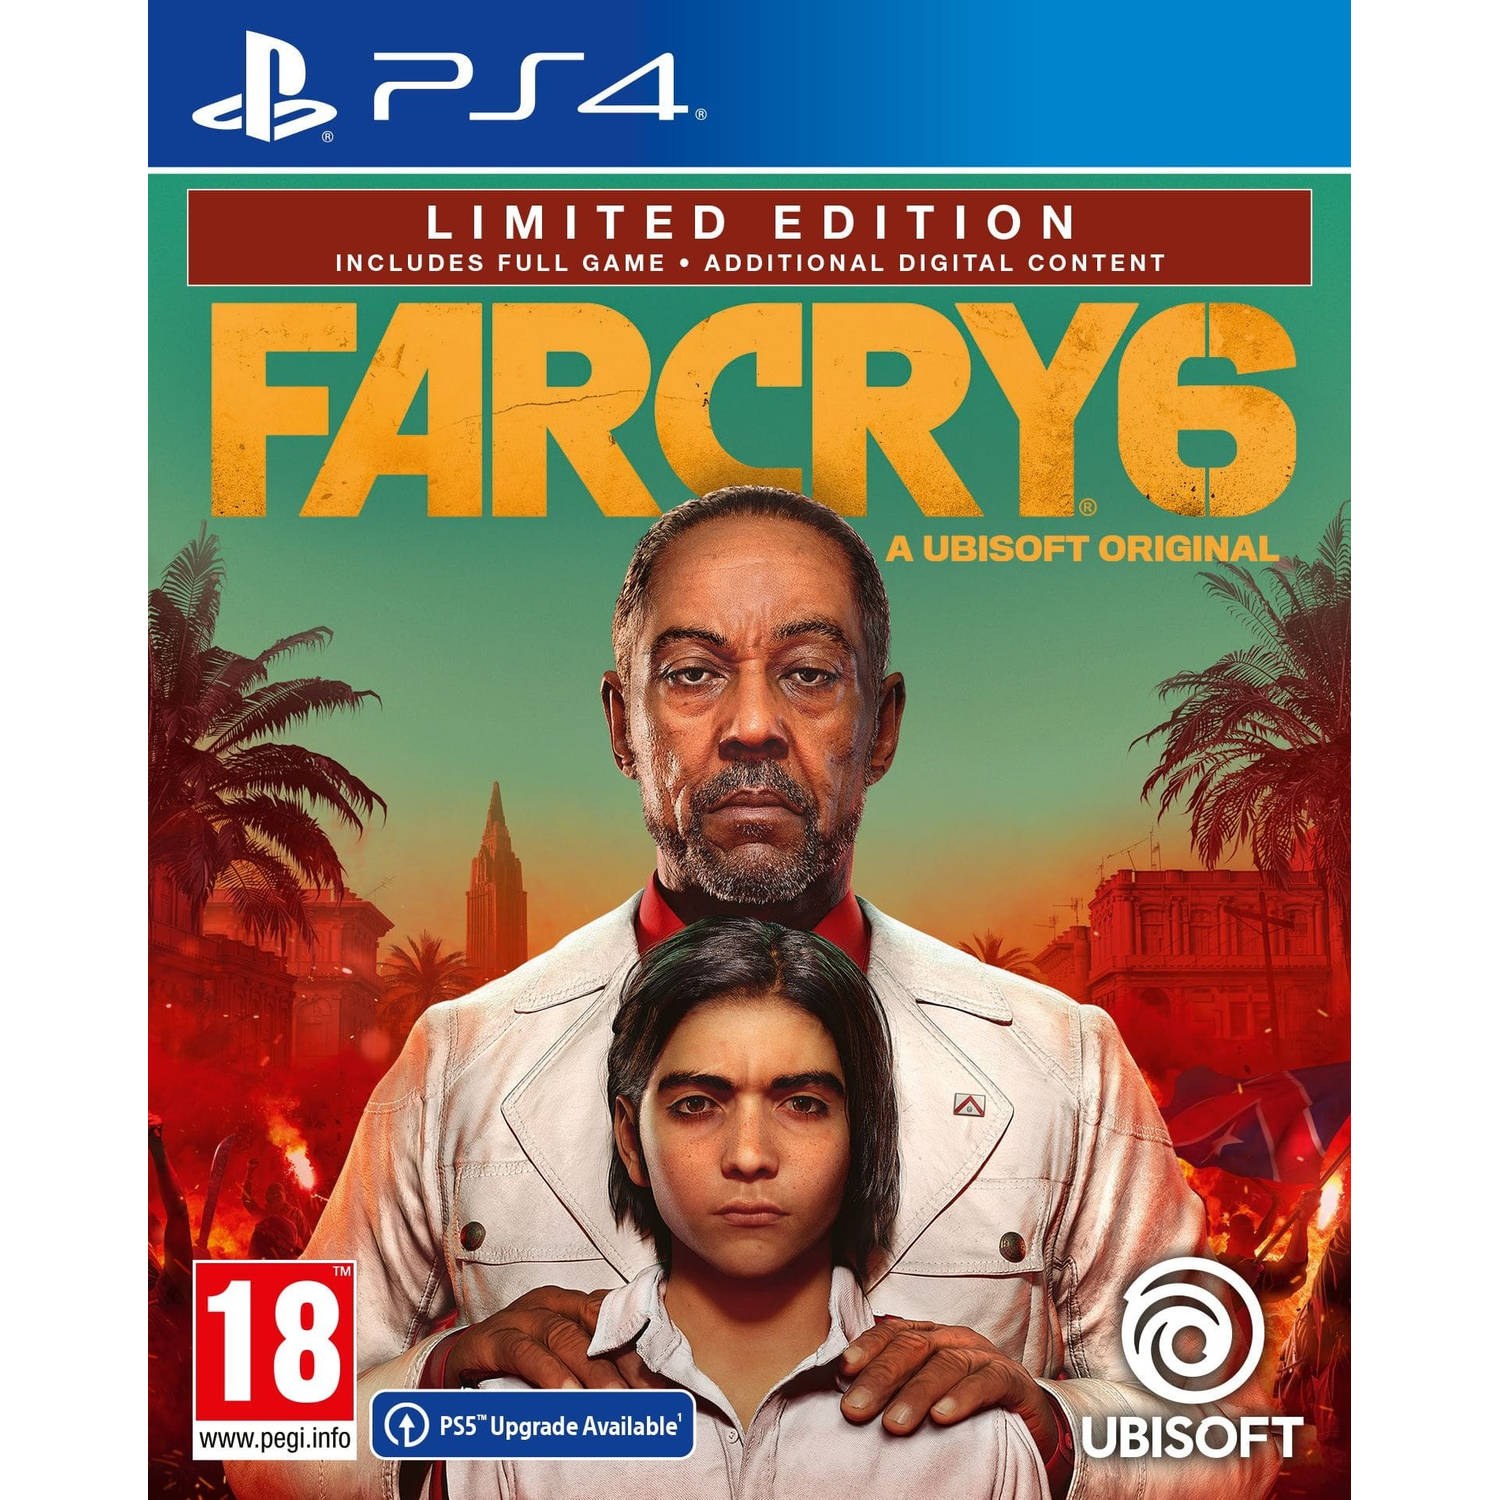 Far Cry 6: Limited Edition - PS4